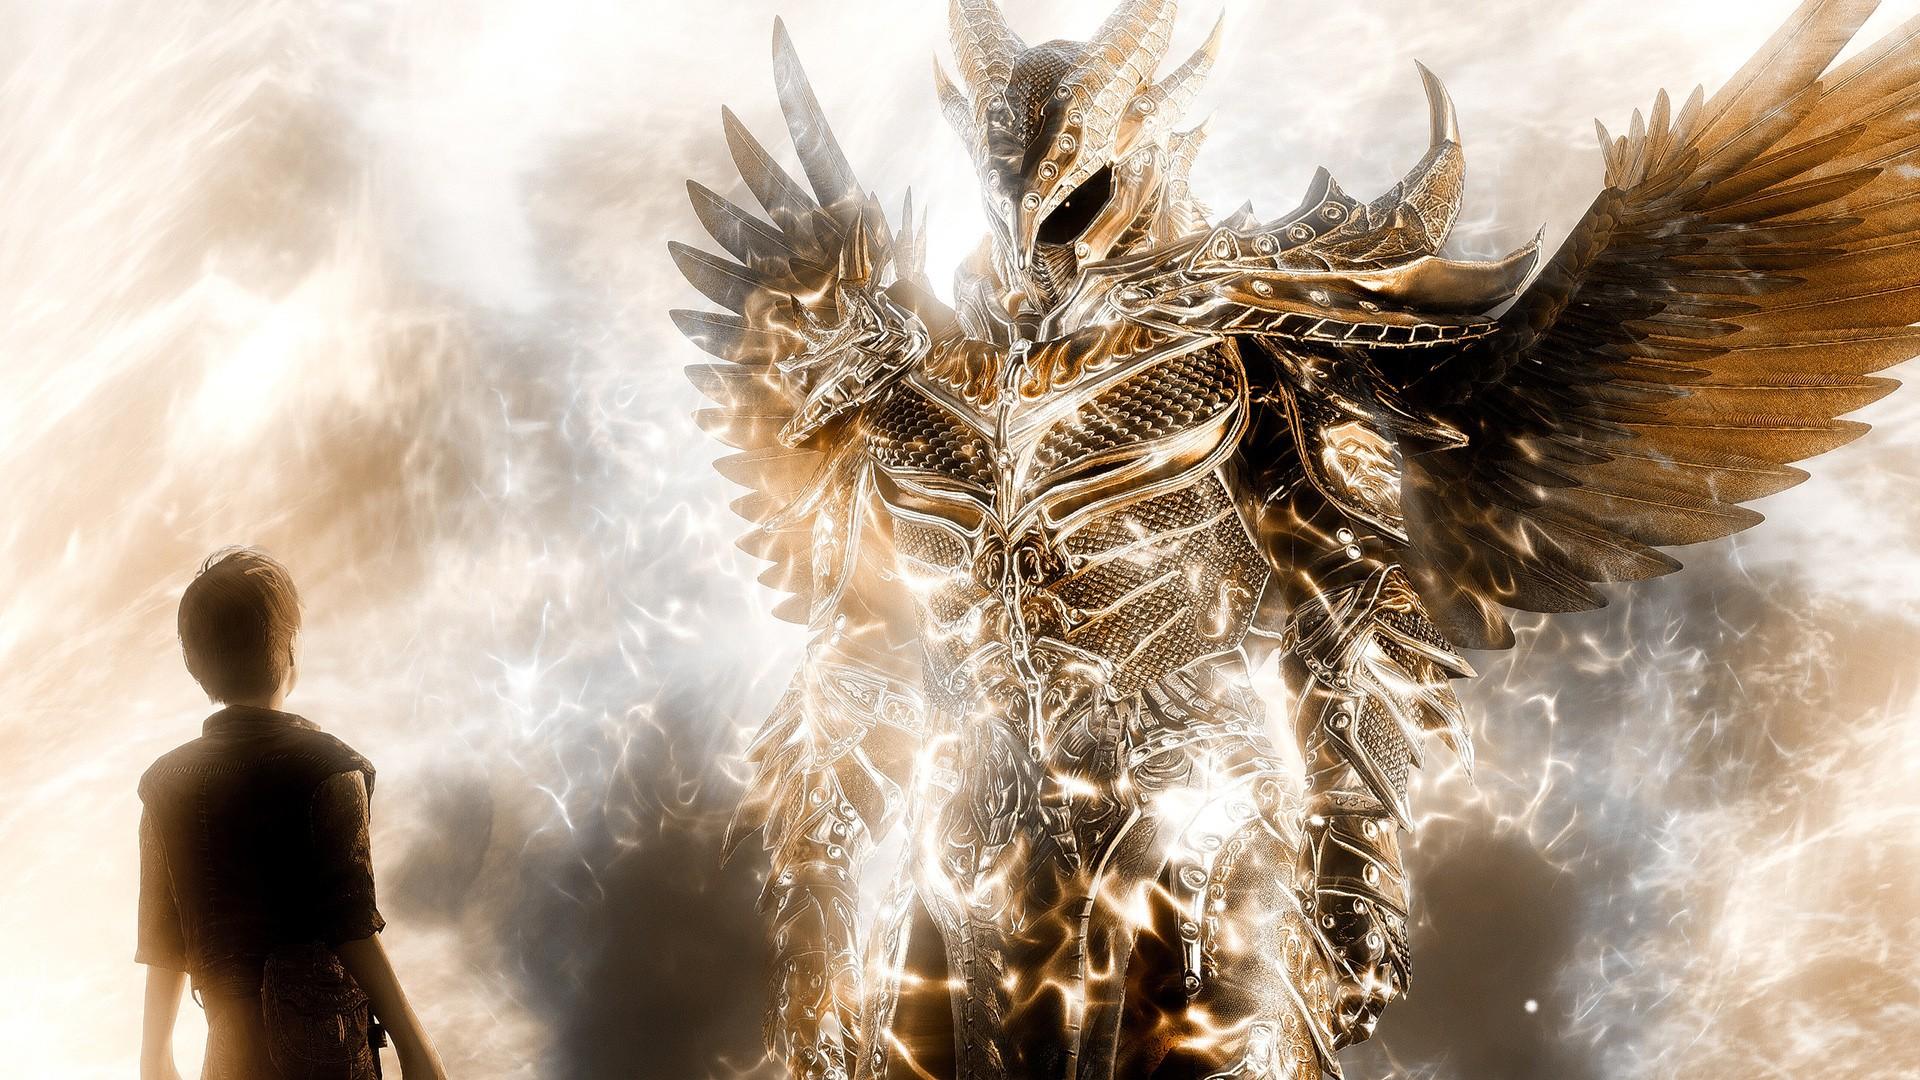 A man and a demon in golden armor wallpaper and image